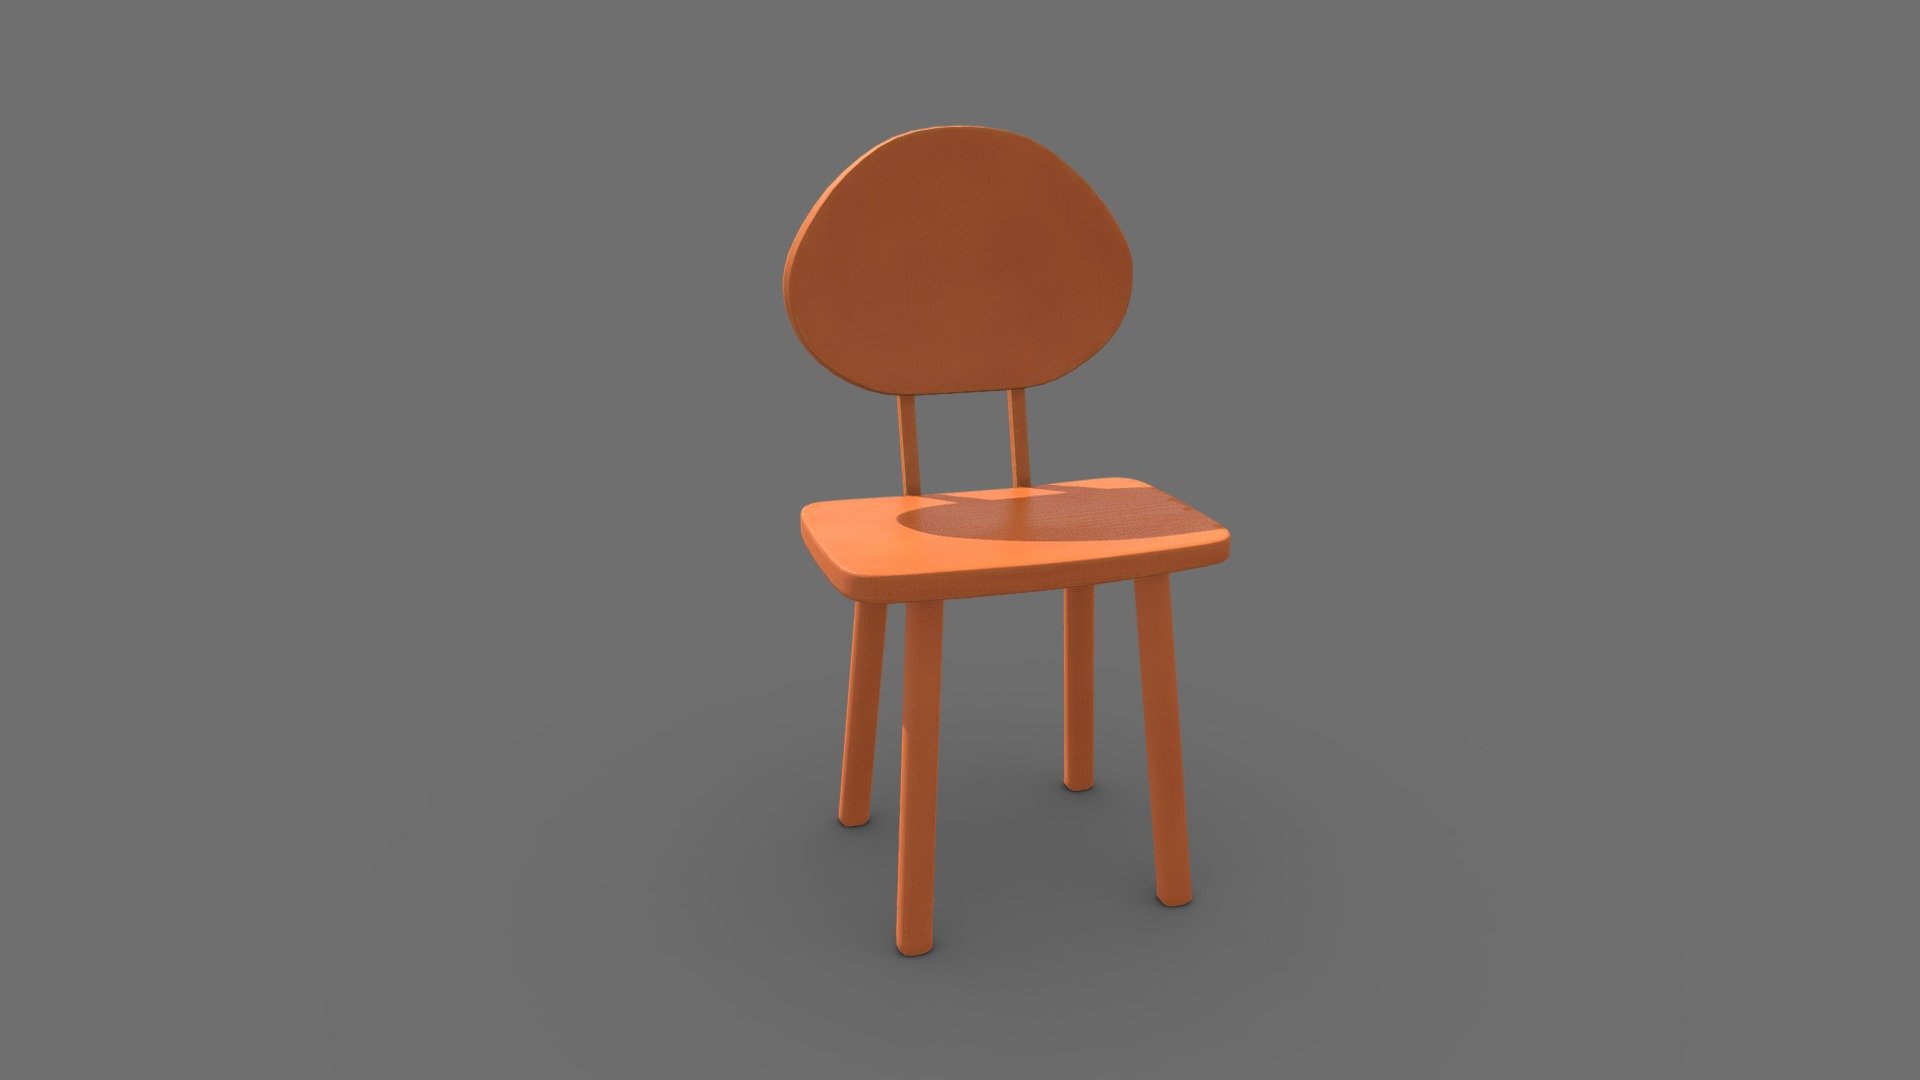 Cartoon wooden chair

Files :




Blender 3.5

Fbx

Obj

Gltf

Usdz

PBR Material

4 Textures _ 4k .png (Color, Specular, Roughness, Normals)

Unit system is set to metric(m). The dimensions are real

Any questions or comments about the model, you can write to me. I will be happy to assist you :) - Cartoon brown wooden chair - Buy Royalty Free 3D model by 3D Figures (@3DFigures) 3d model